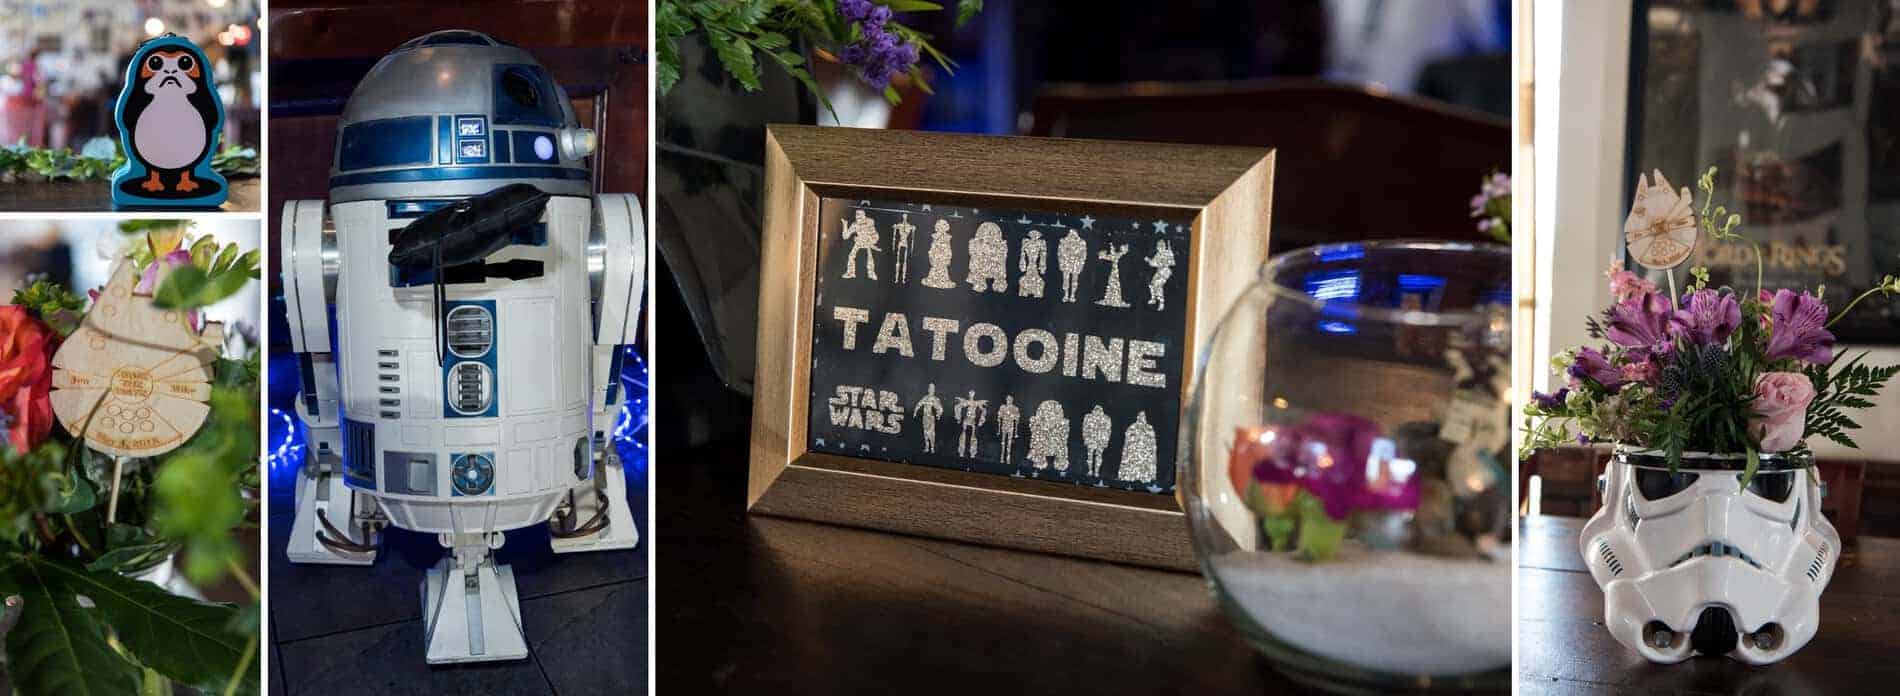 Wedding Sign and R2-D2 ringbearer at a Sci-Fi Wedding